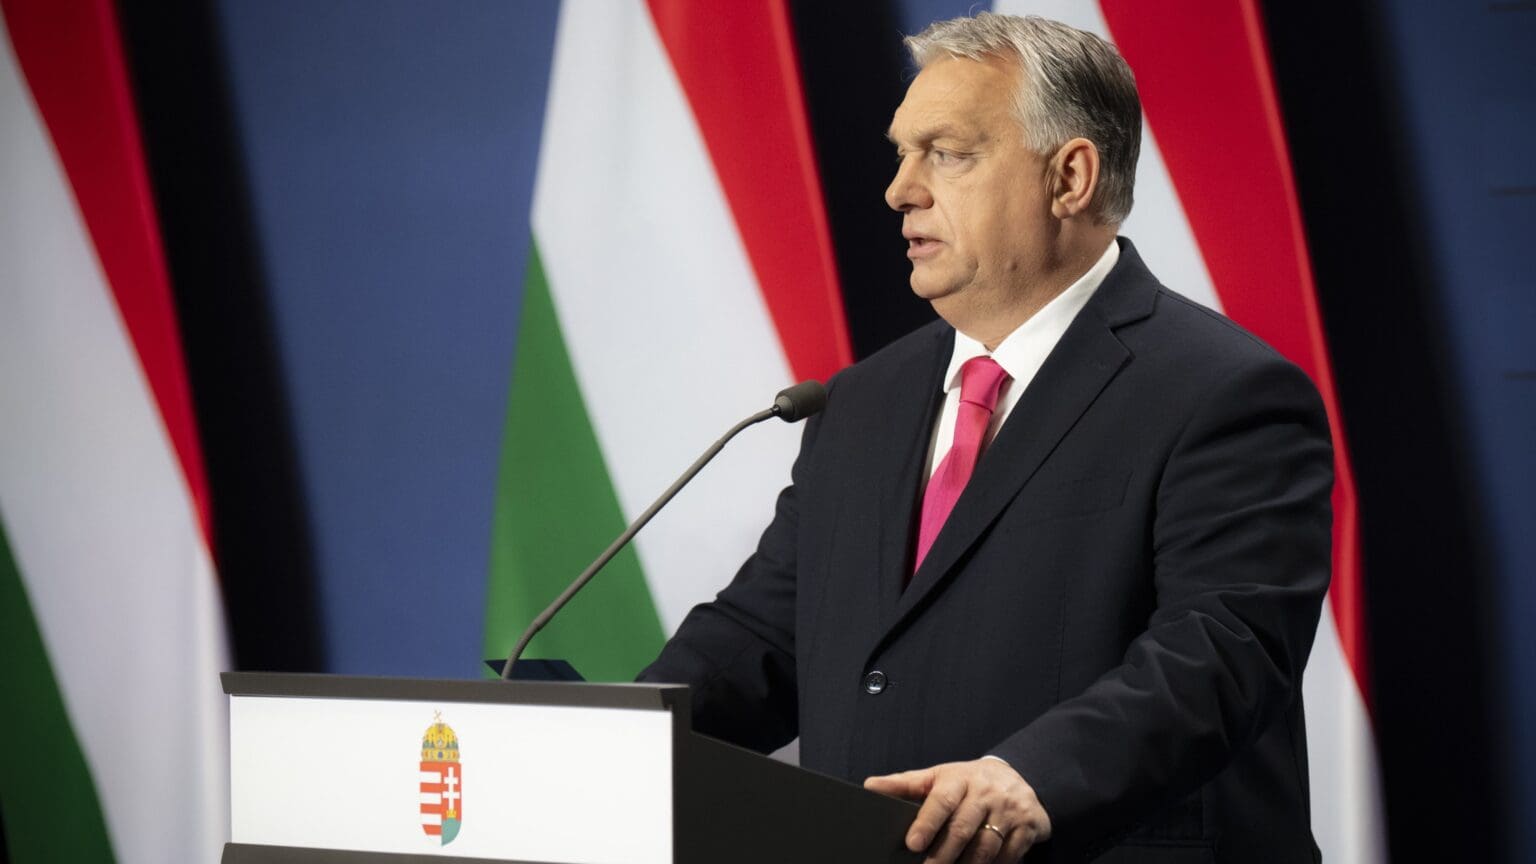 Viktor Orbán Talks Ukraine, EU Issues at ‘Year in Review’ Press Conference